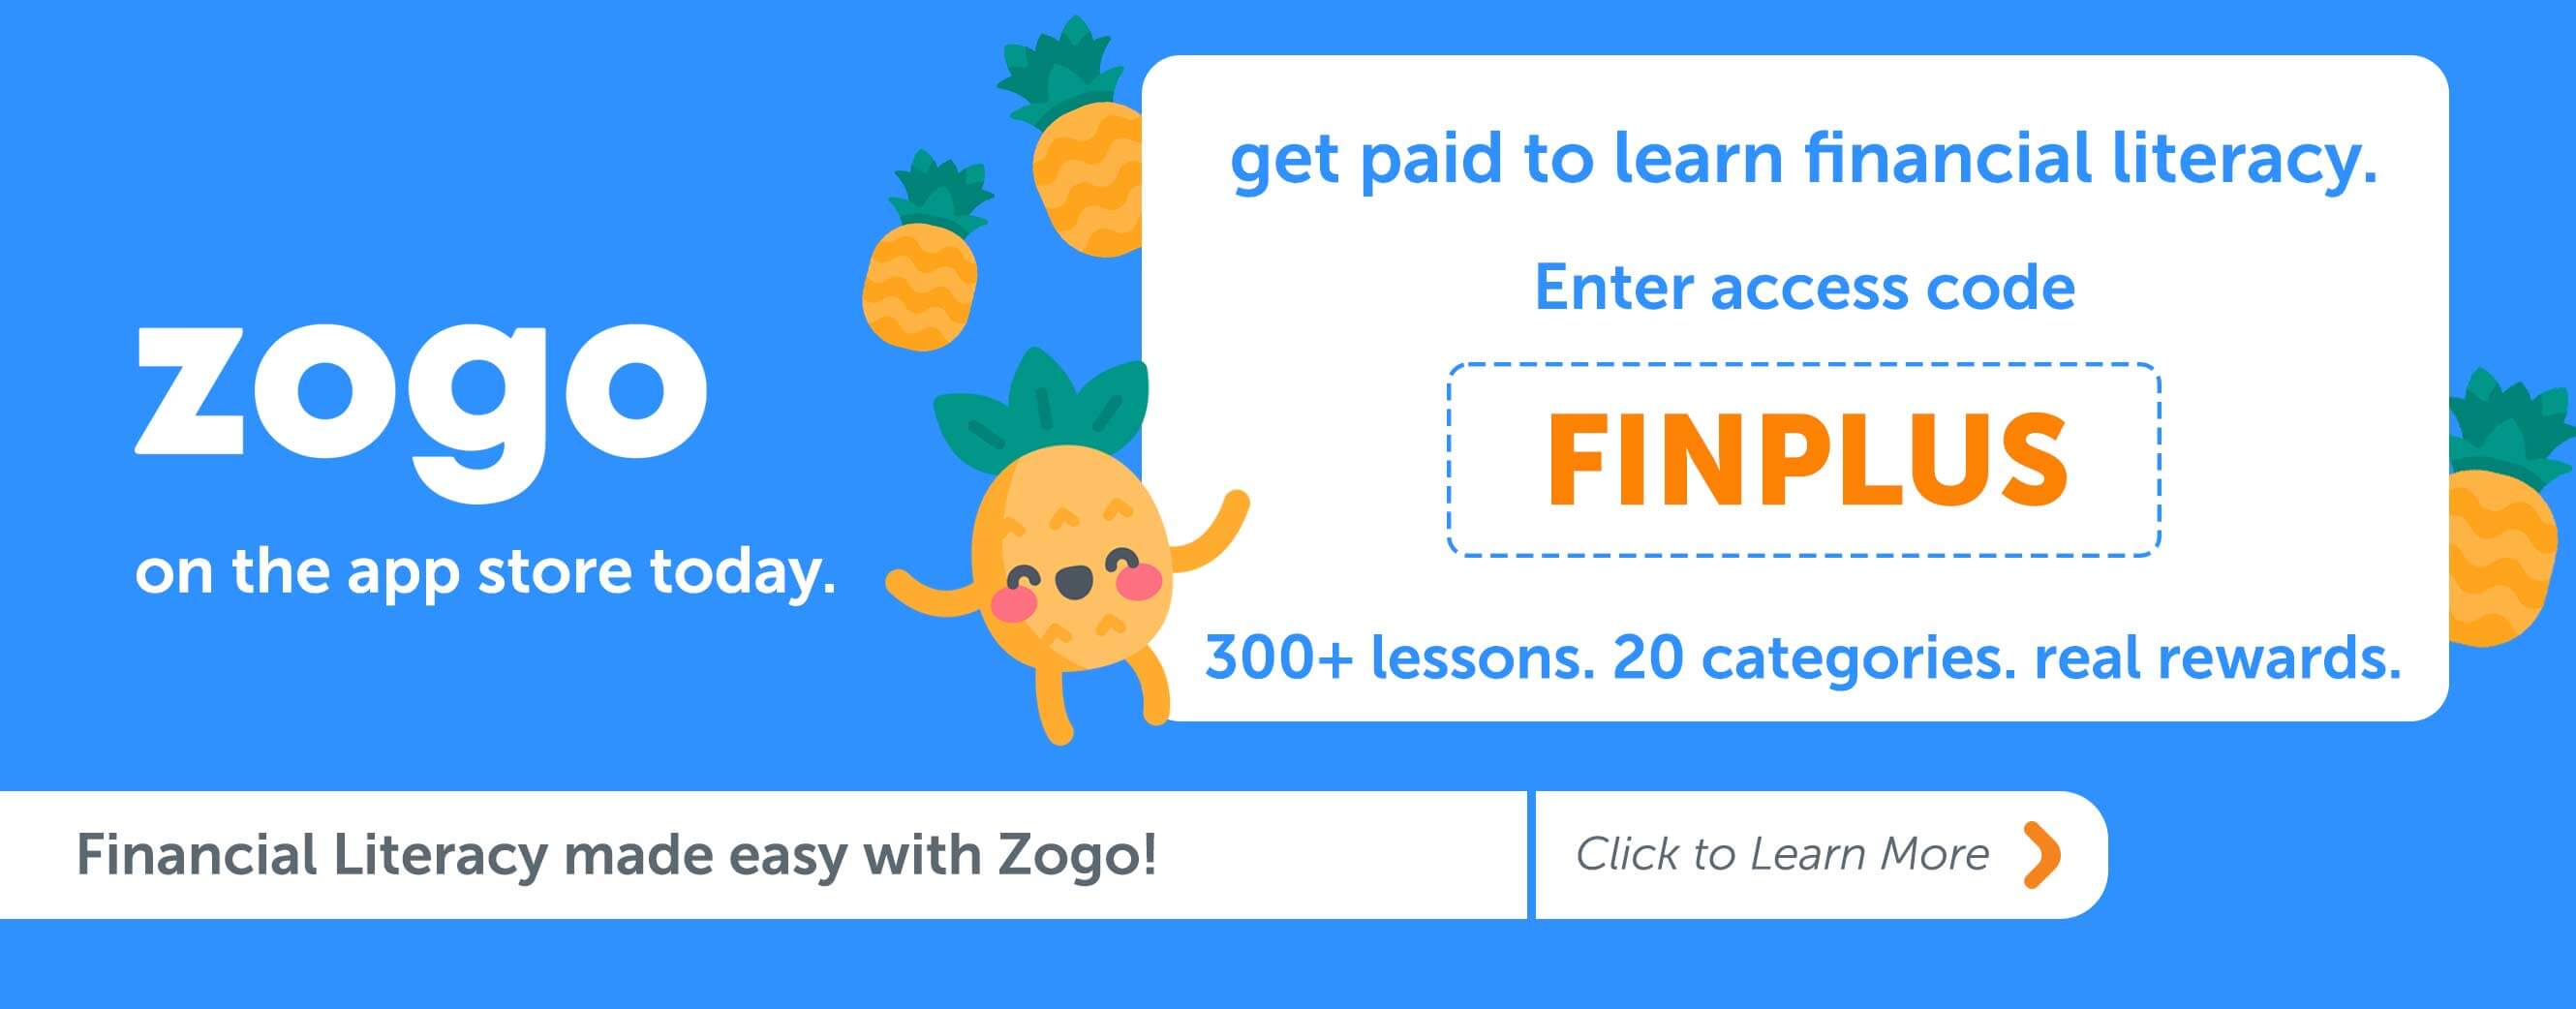 Financial Literacy made easy with Zogo! Click to learn more